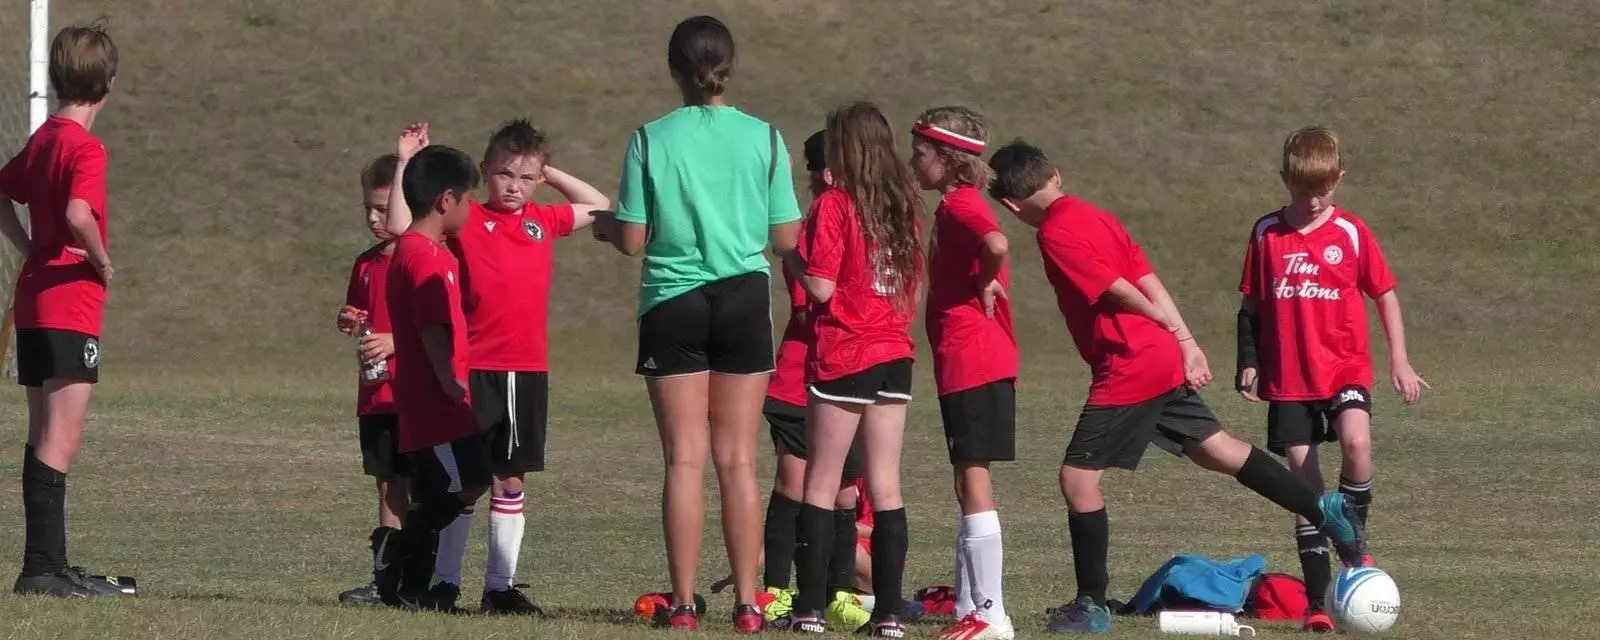 Soccer Conditioning  Conditioning for Young Soccer Players